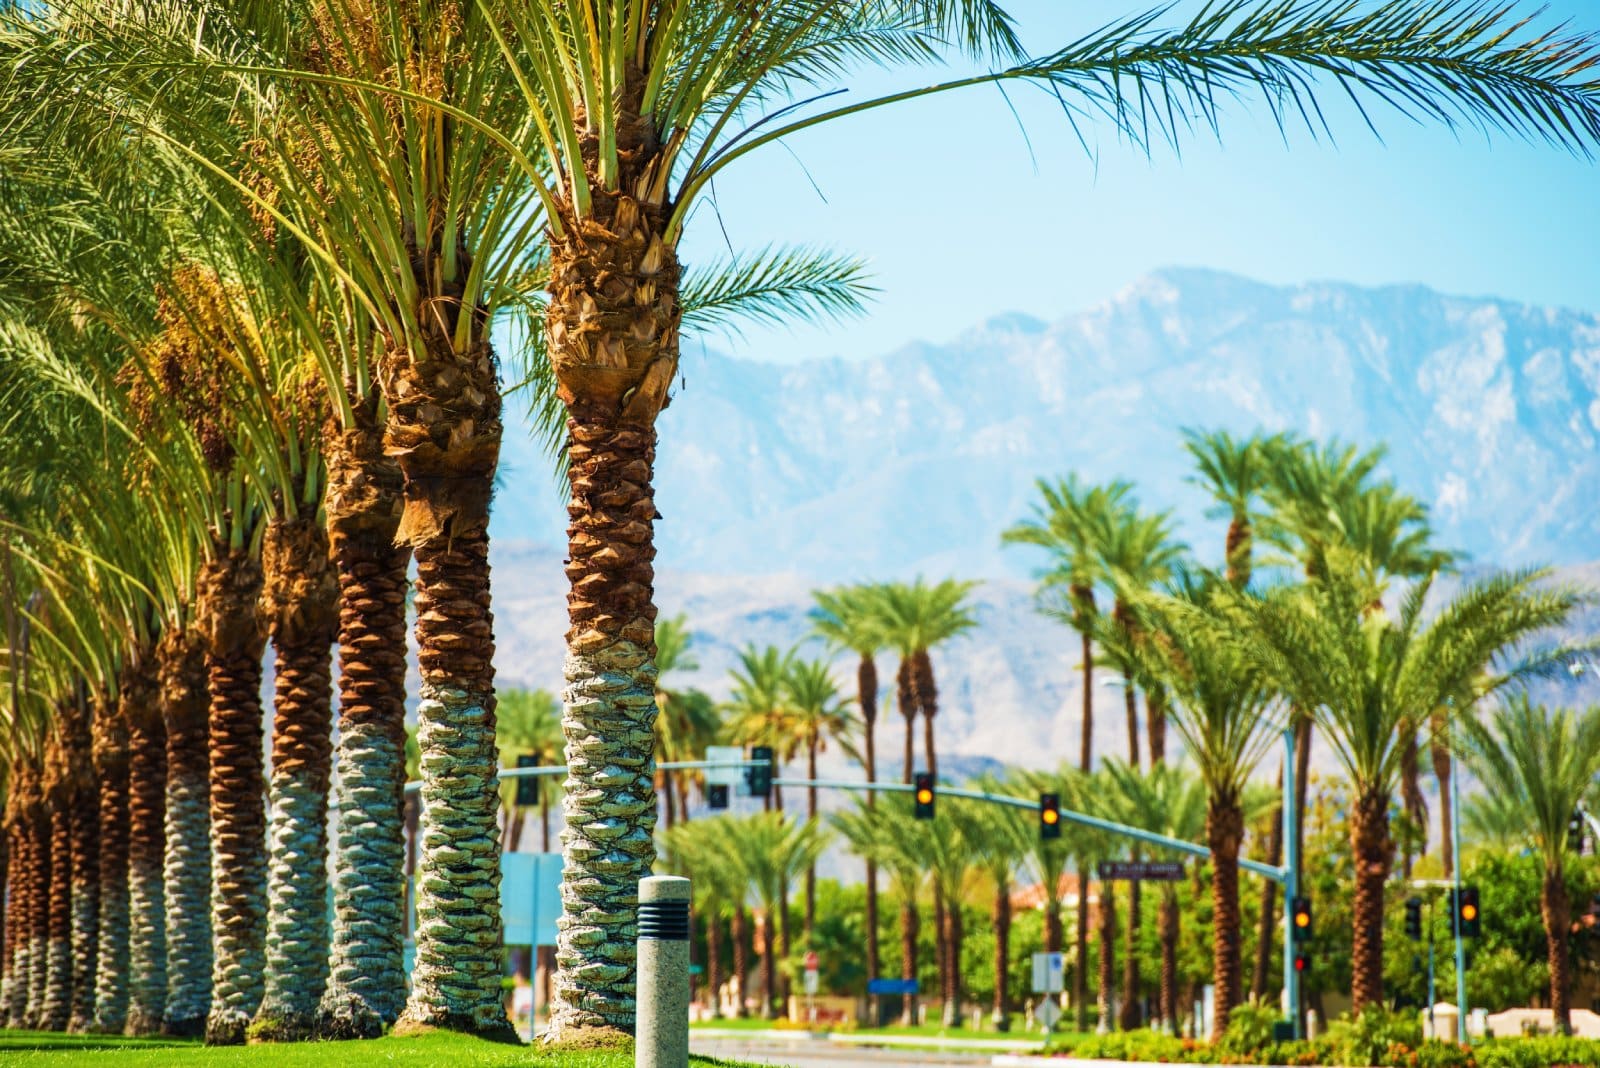 <p class="wp-caption-text">Image Credit: Shutterstock / Virrage Images</p>  <p><span>The playground of the rich and retired, Palm Springs, can still be kind to your wallet. A spot in an RV resort will run you about $600 a month, while a mid-century modern villa could cost $3,000 and up. For something offbeat, check out the local hot spring spas—because nothing says quirky like soaking in mineral water under the stars.</span></p>